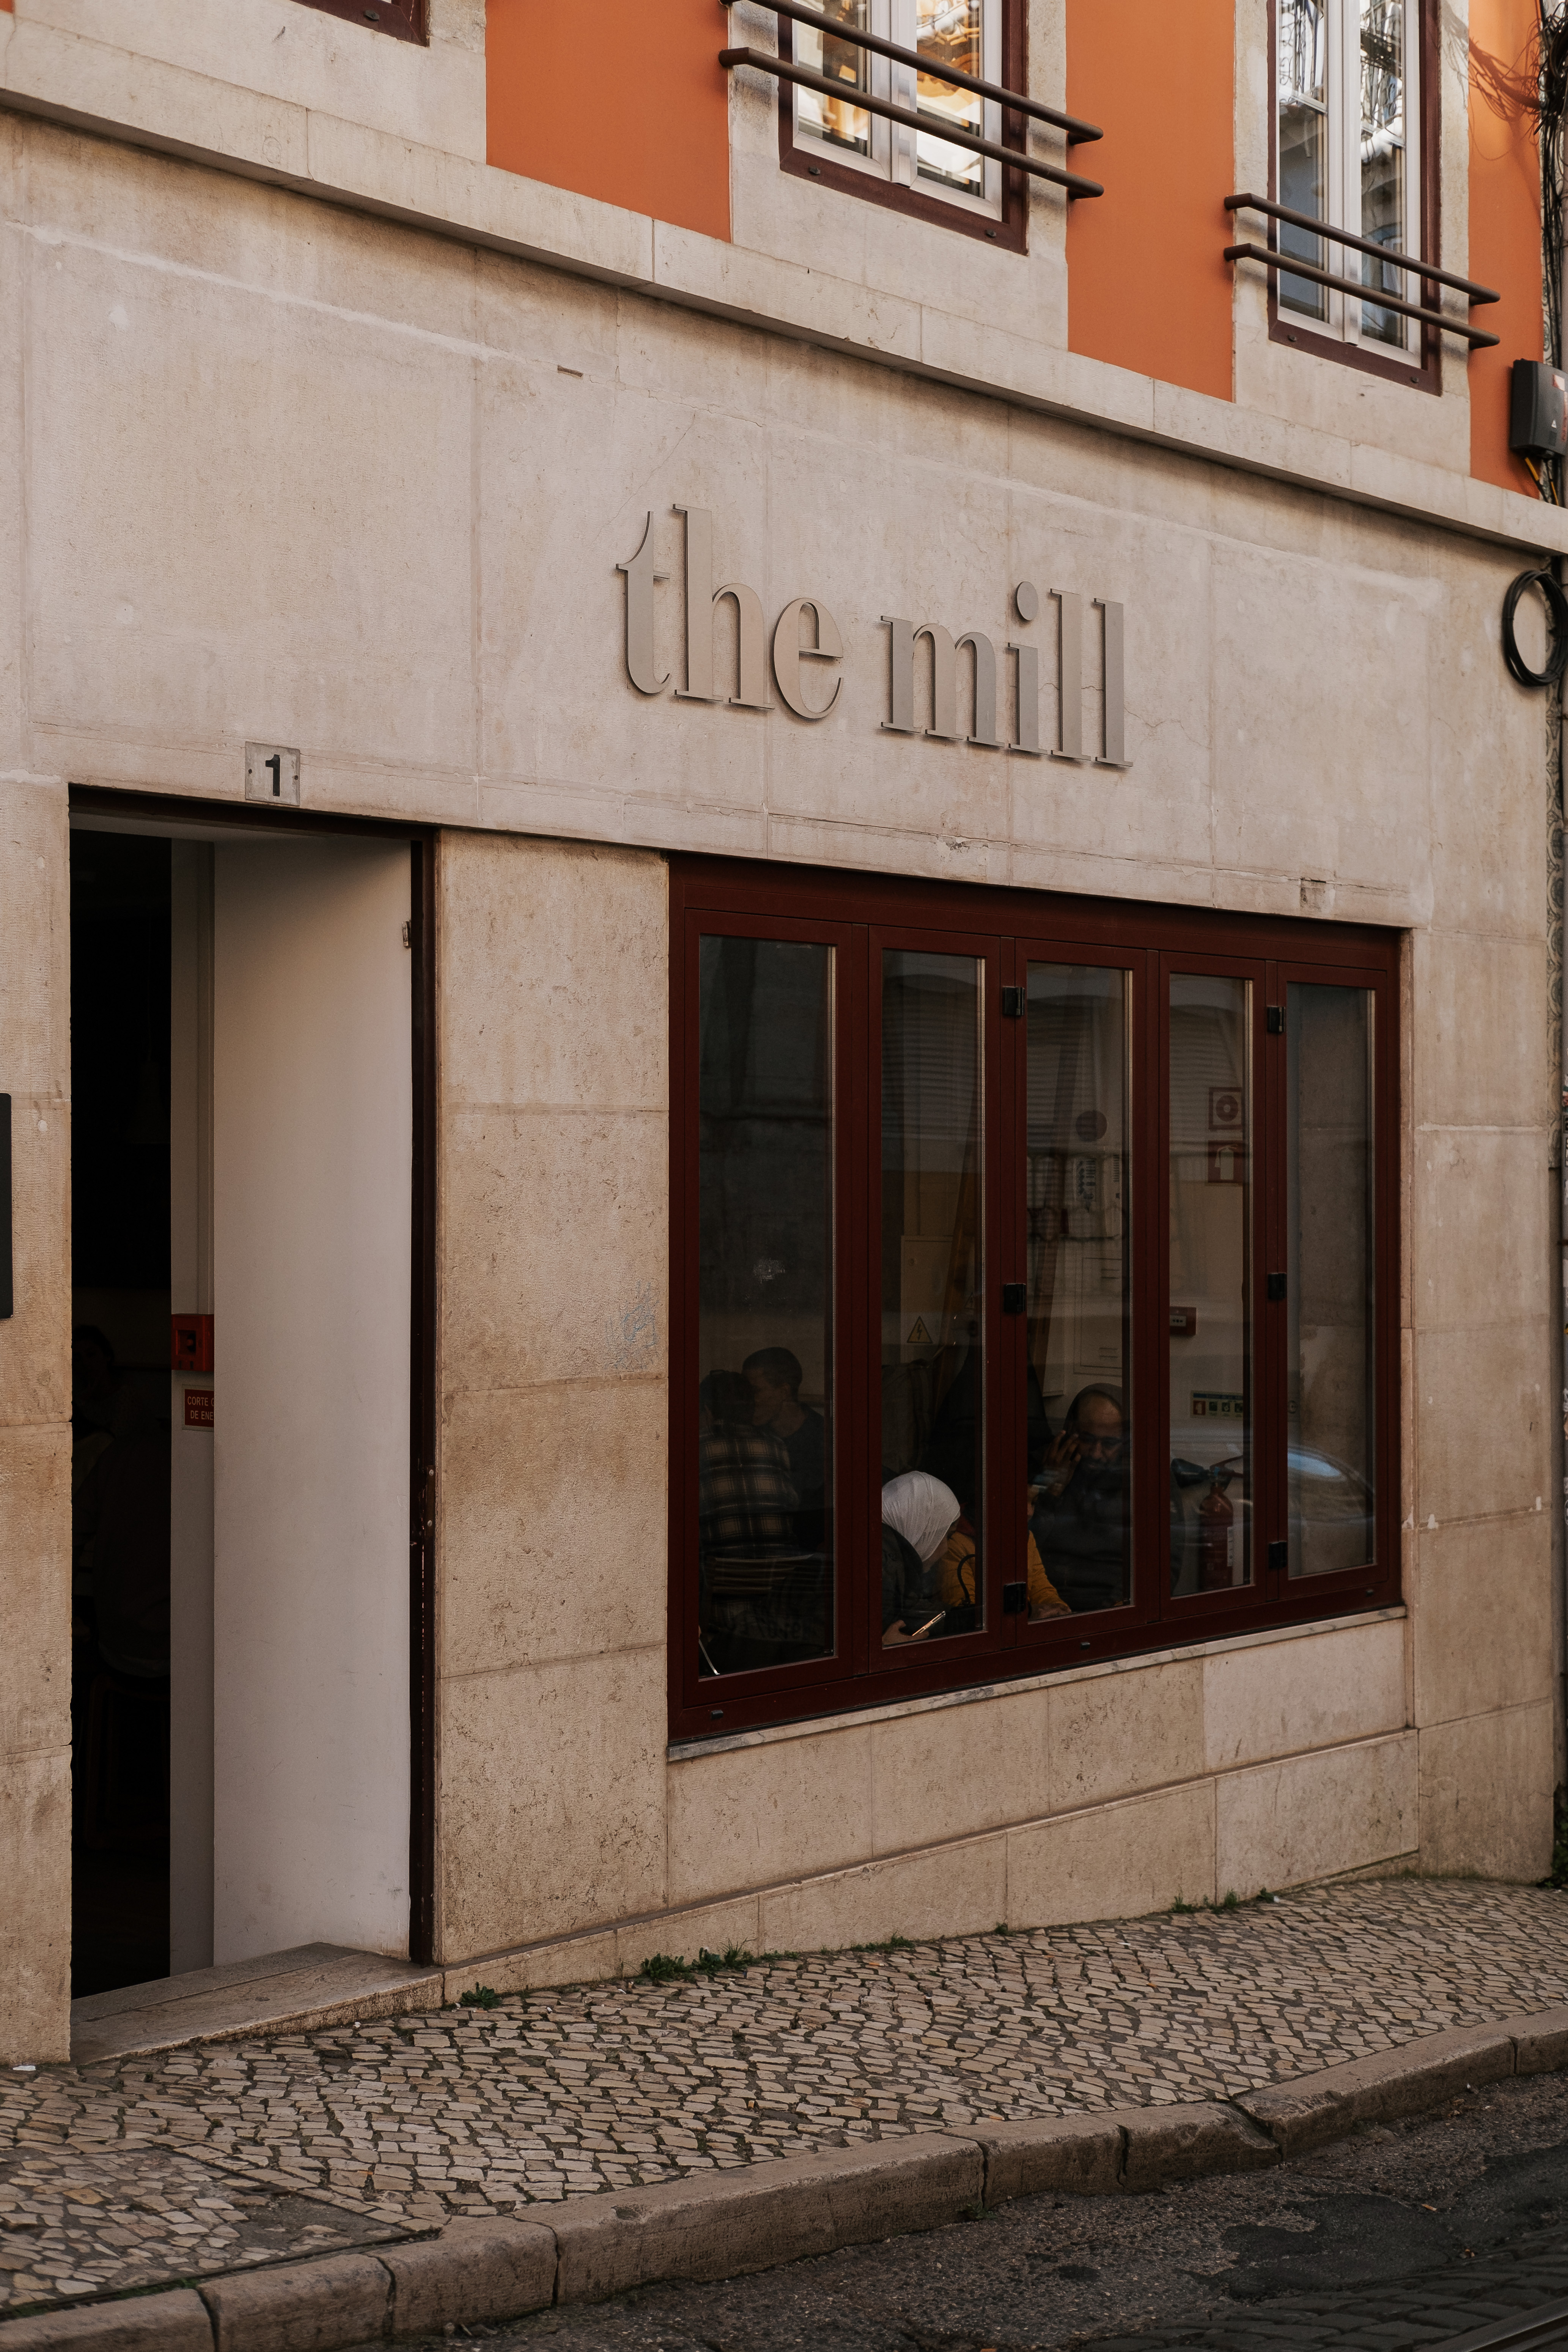 The Mill, Lisbon, uses Arabica beans for their coffee // Photo credit @heyandiehey